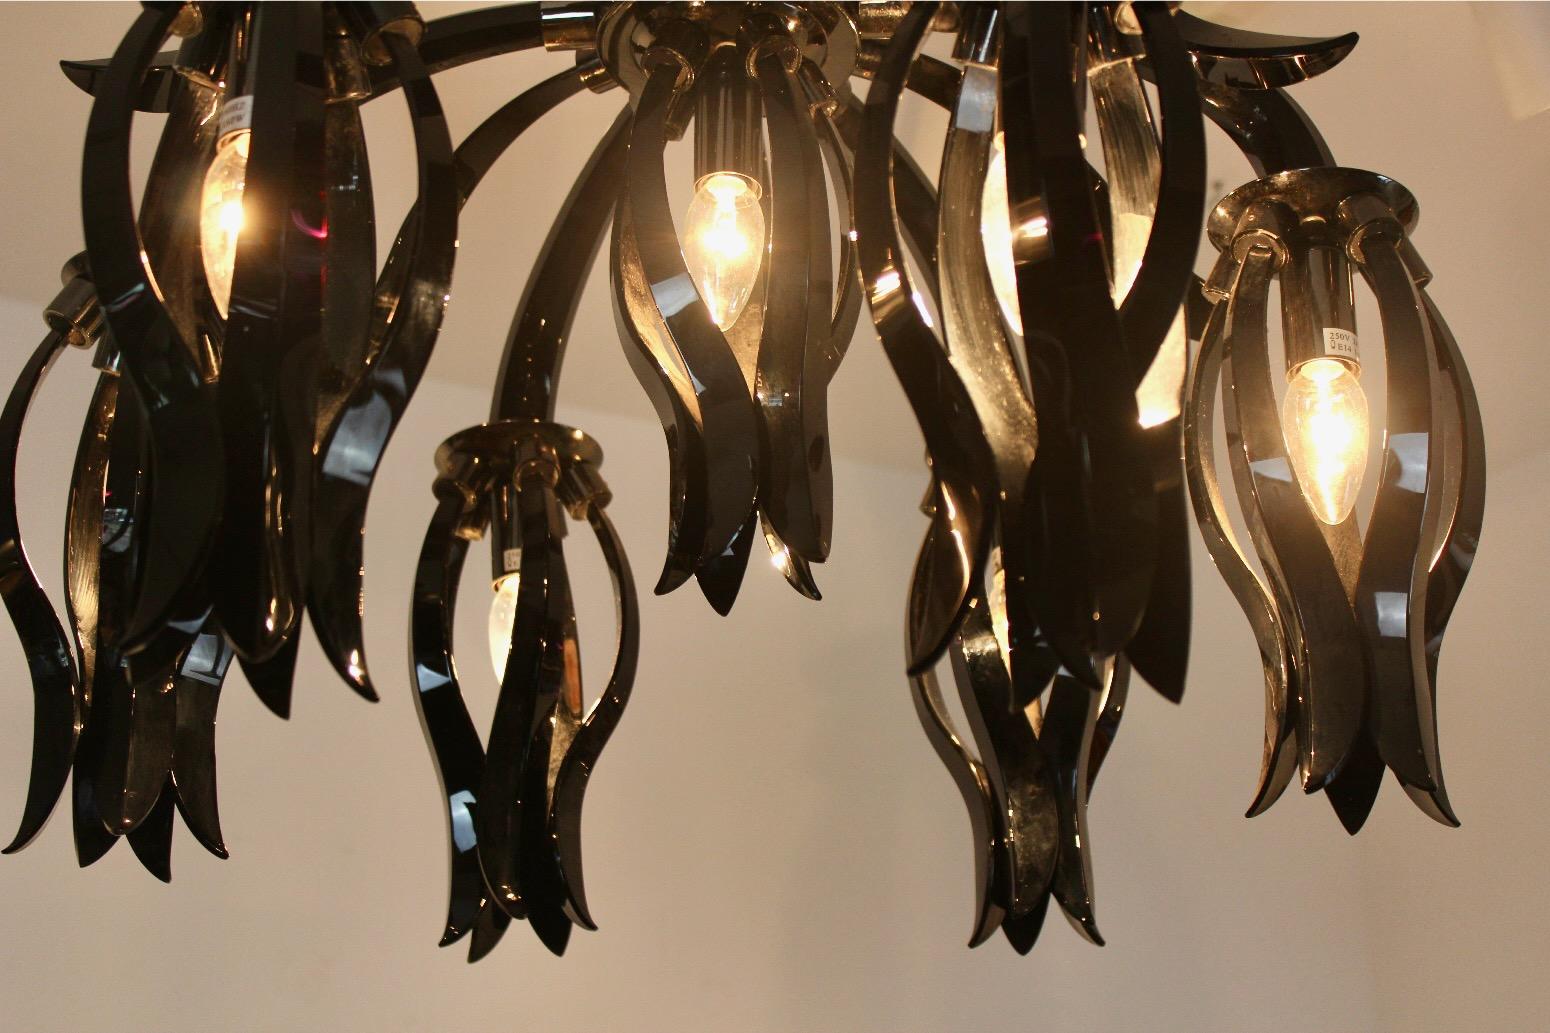 The Black Glass Chandelier by Barovier & Toso is a stunning piece of lighting art that showcases the Venetian glass-making skills of the Barovier & Toso brand. The chandelier features a cascade of black glass pieces that hang from a glass frame,